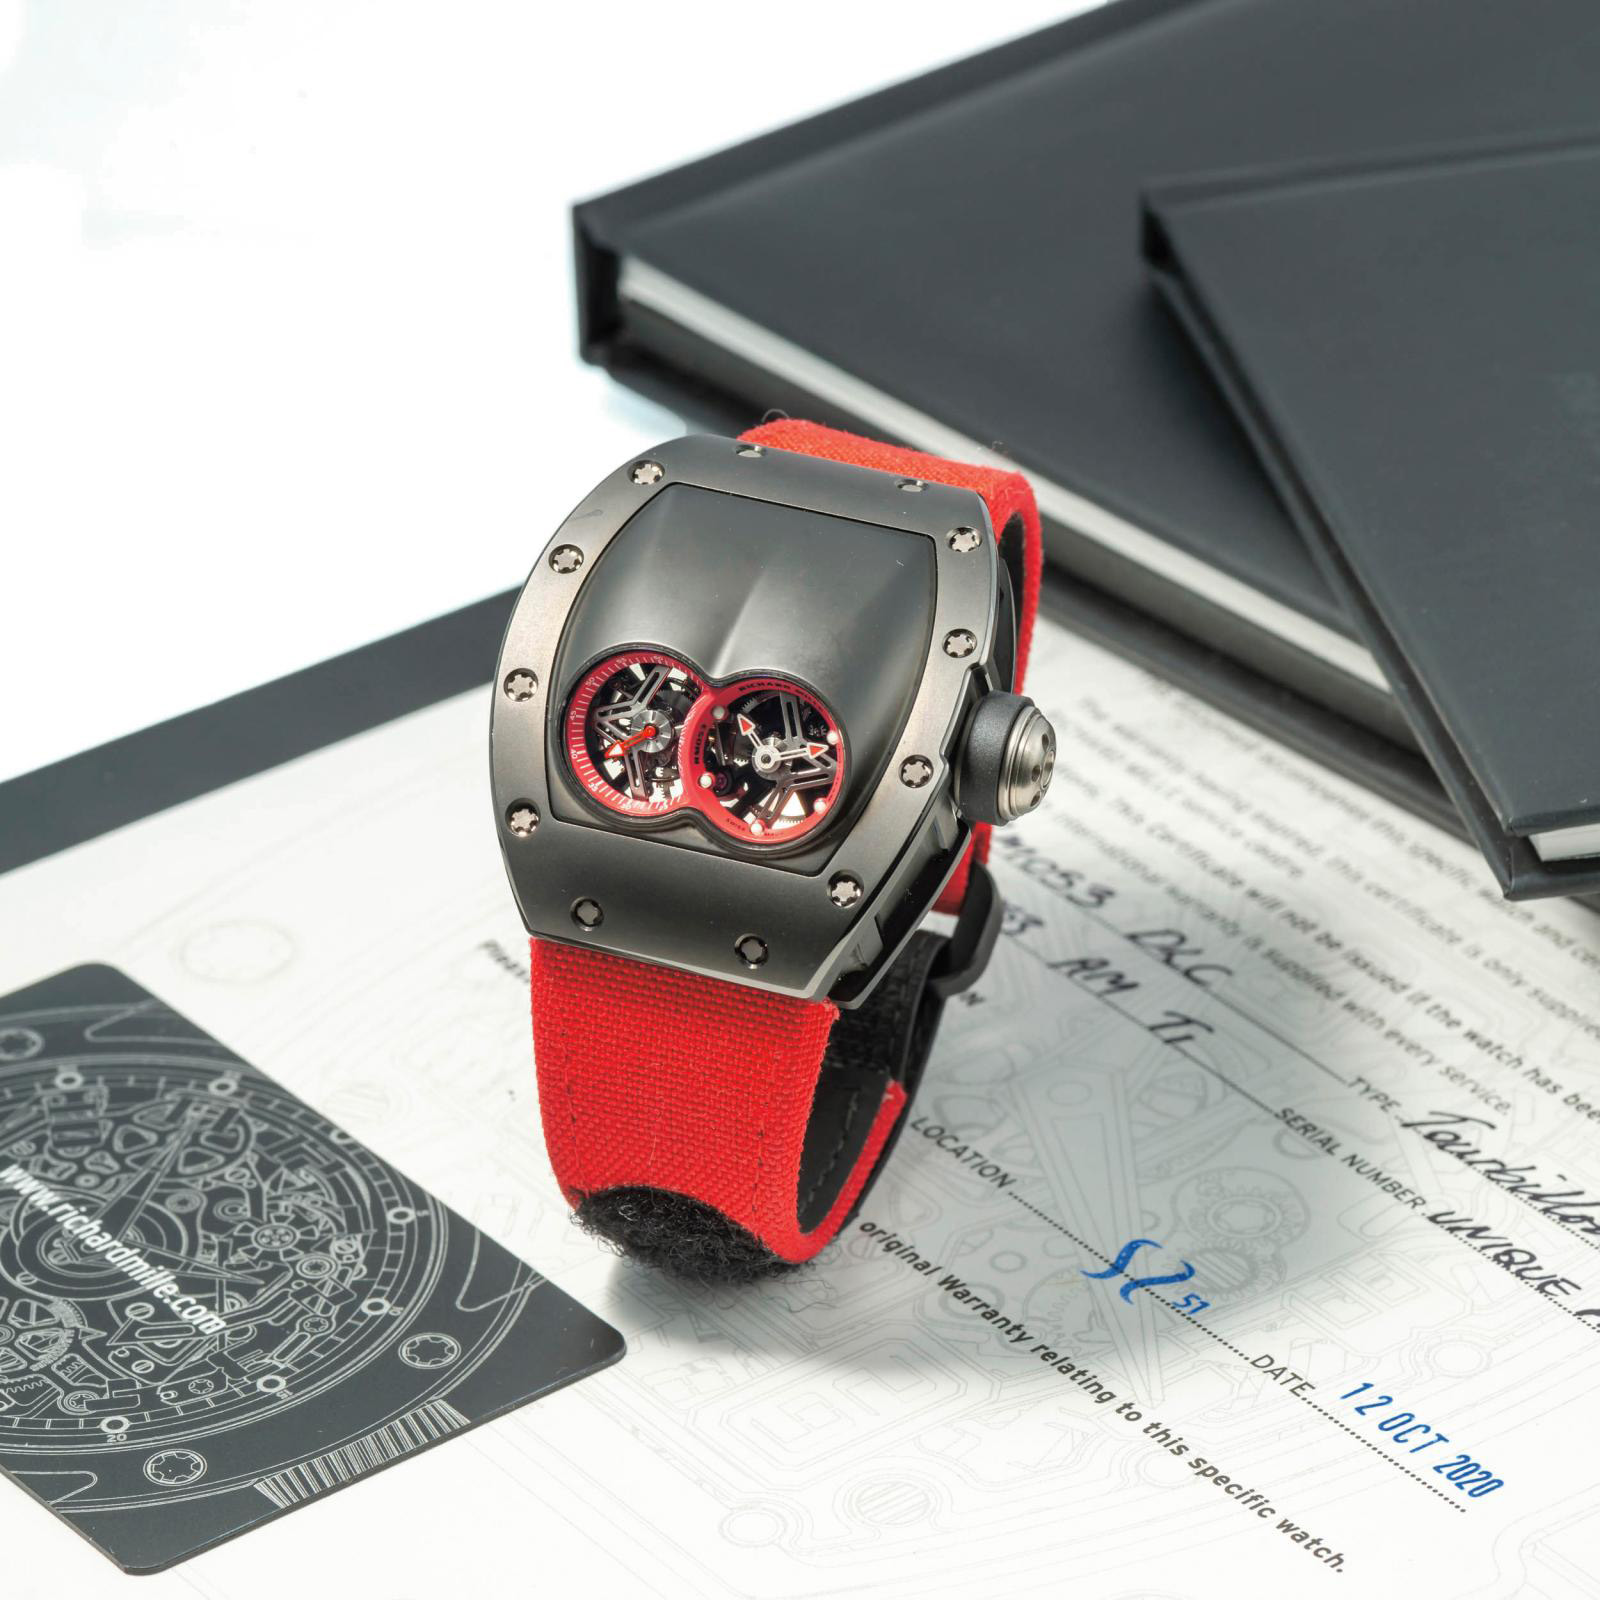 Richard Mille. Men's watch in titanium and red leather, "RM053 DLC" model, 2020, unique piece, weight: 84.2 g/2.97 oz. Estimate: €1/2 M